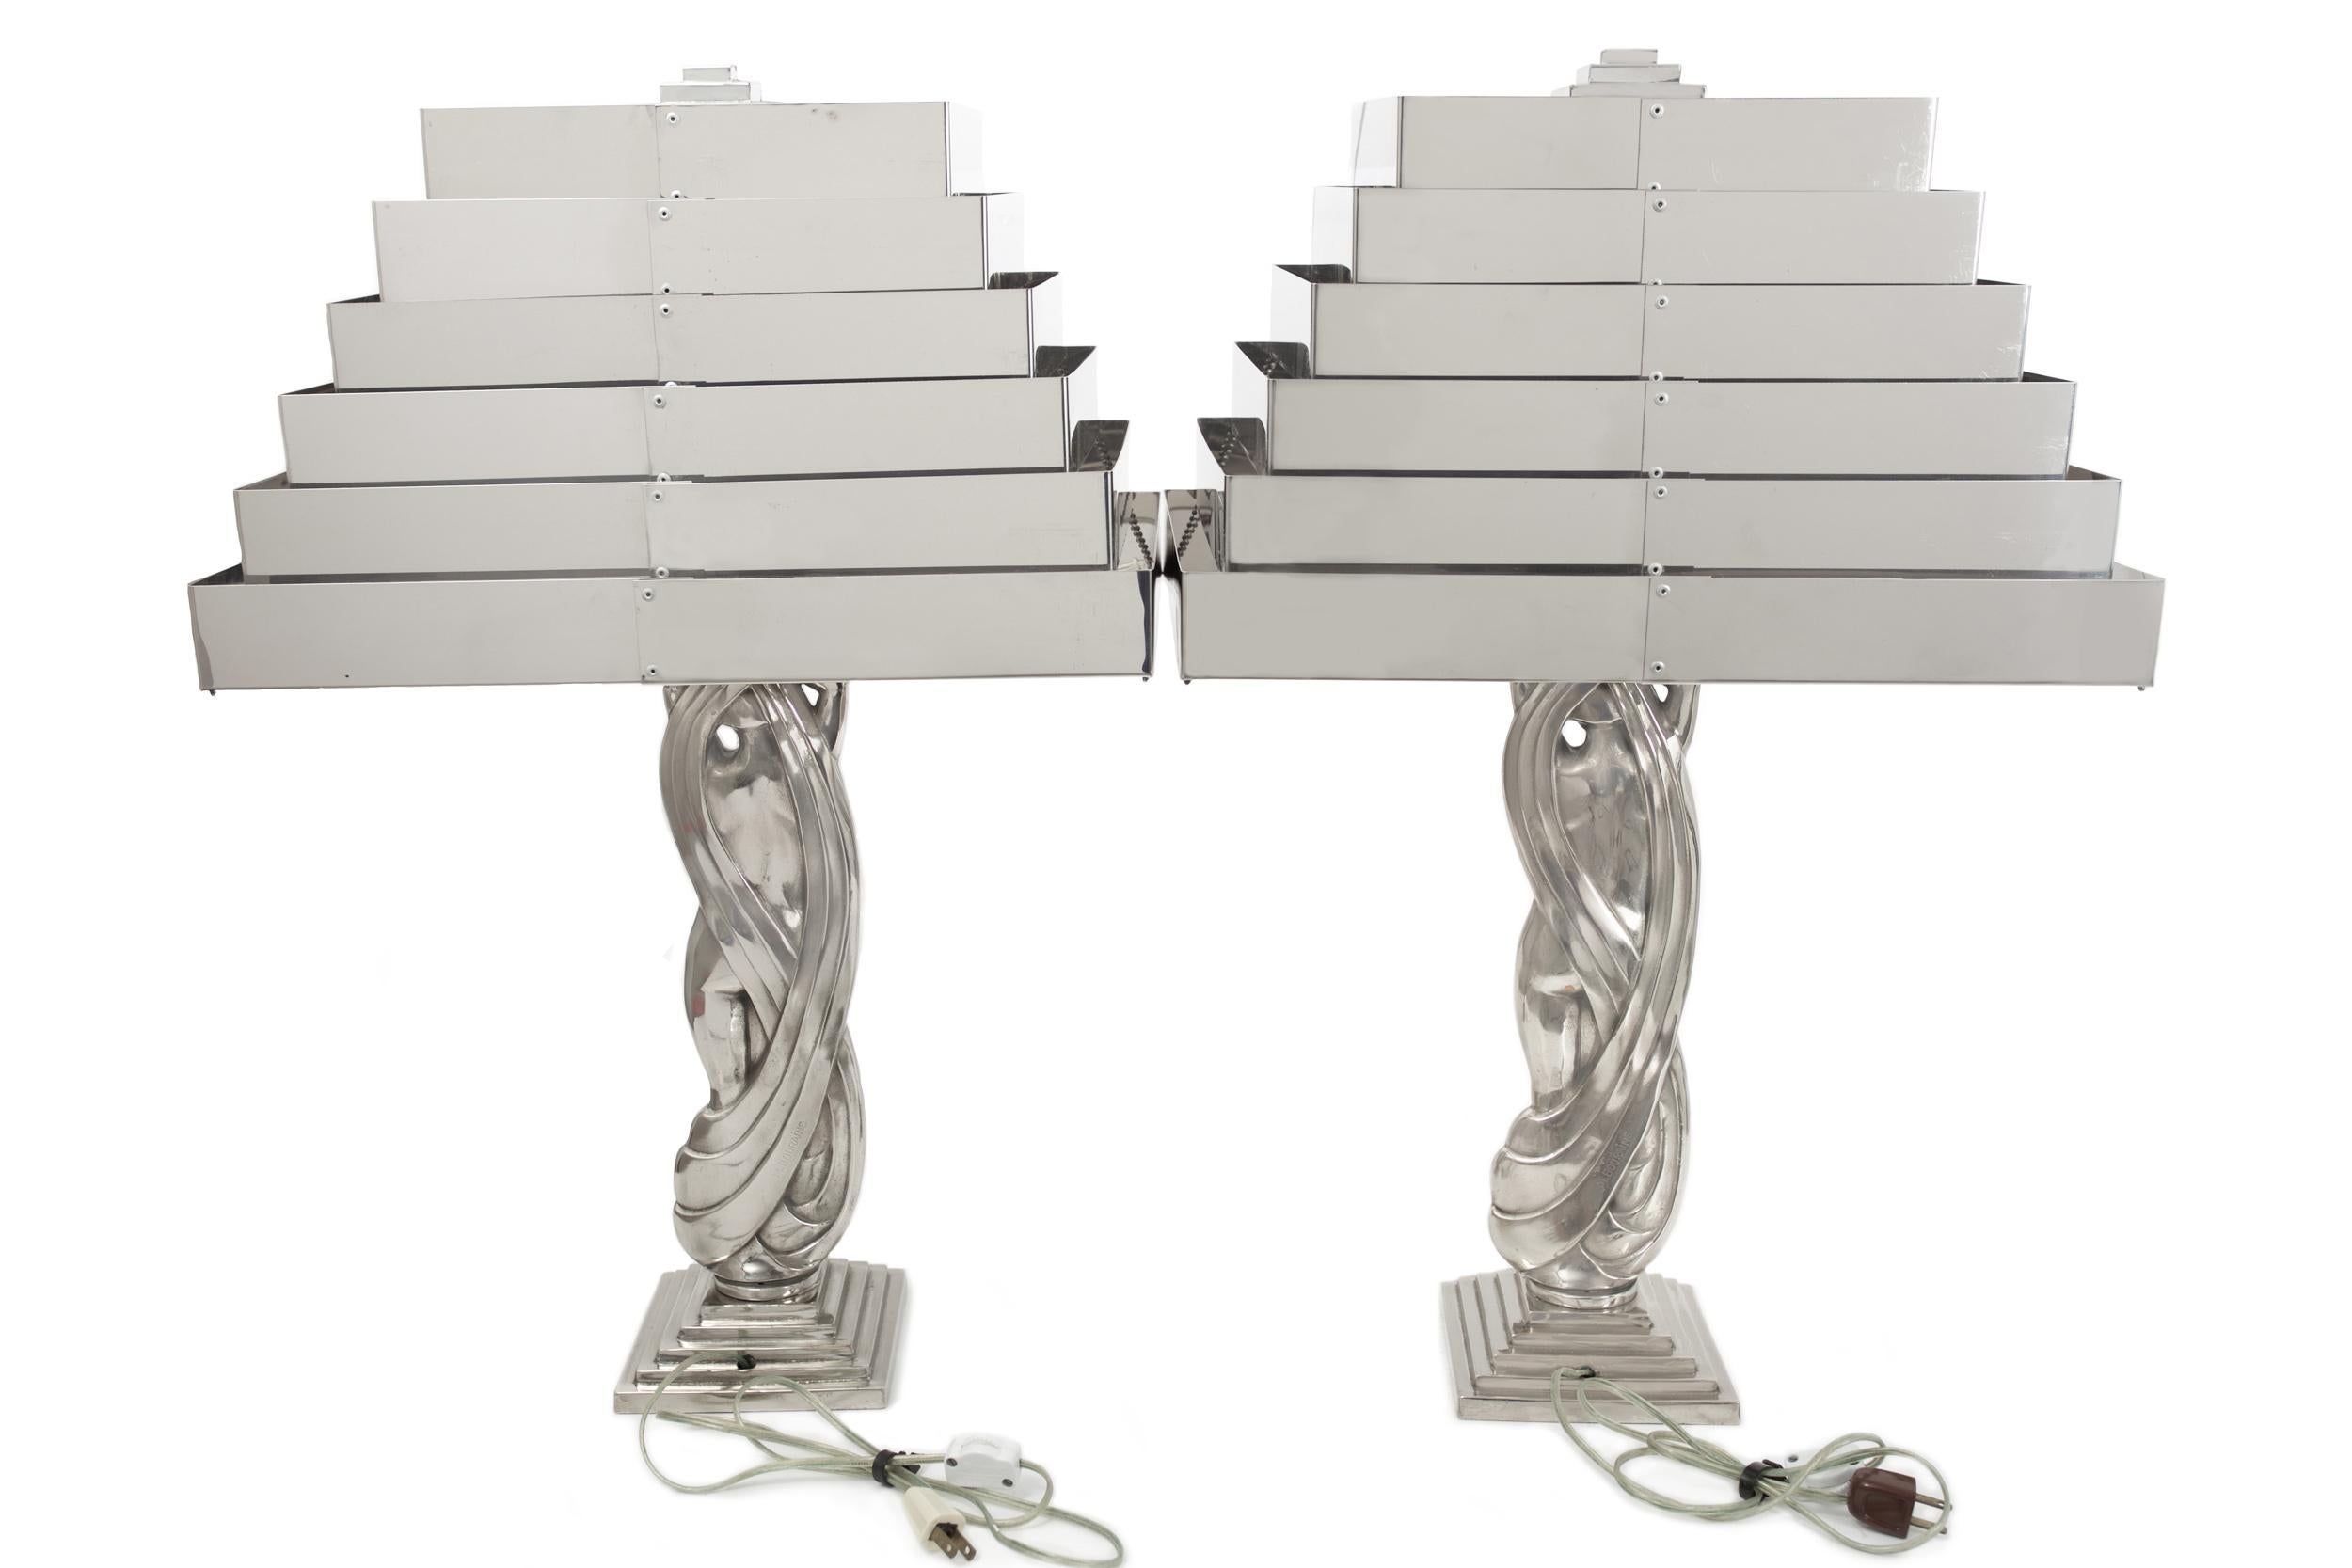 Plated Rare Pair of Art Deco Stylized Figural Nickel Table Lamps, M. Bouraine, C 1930s